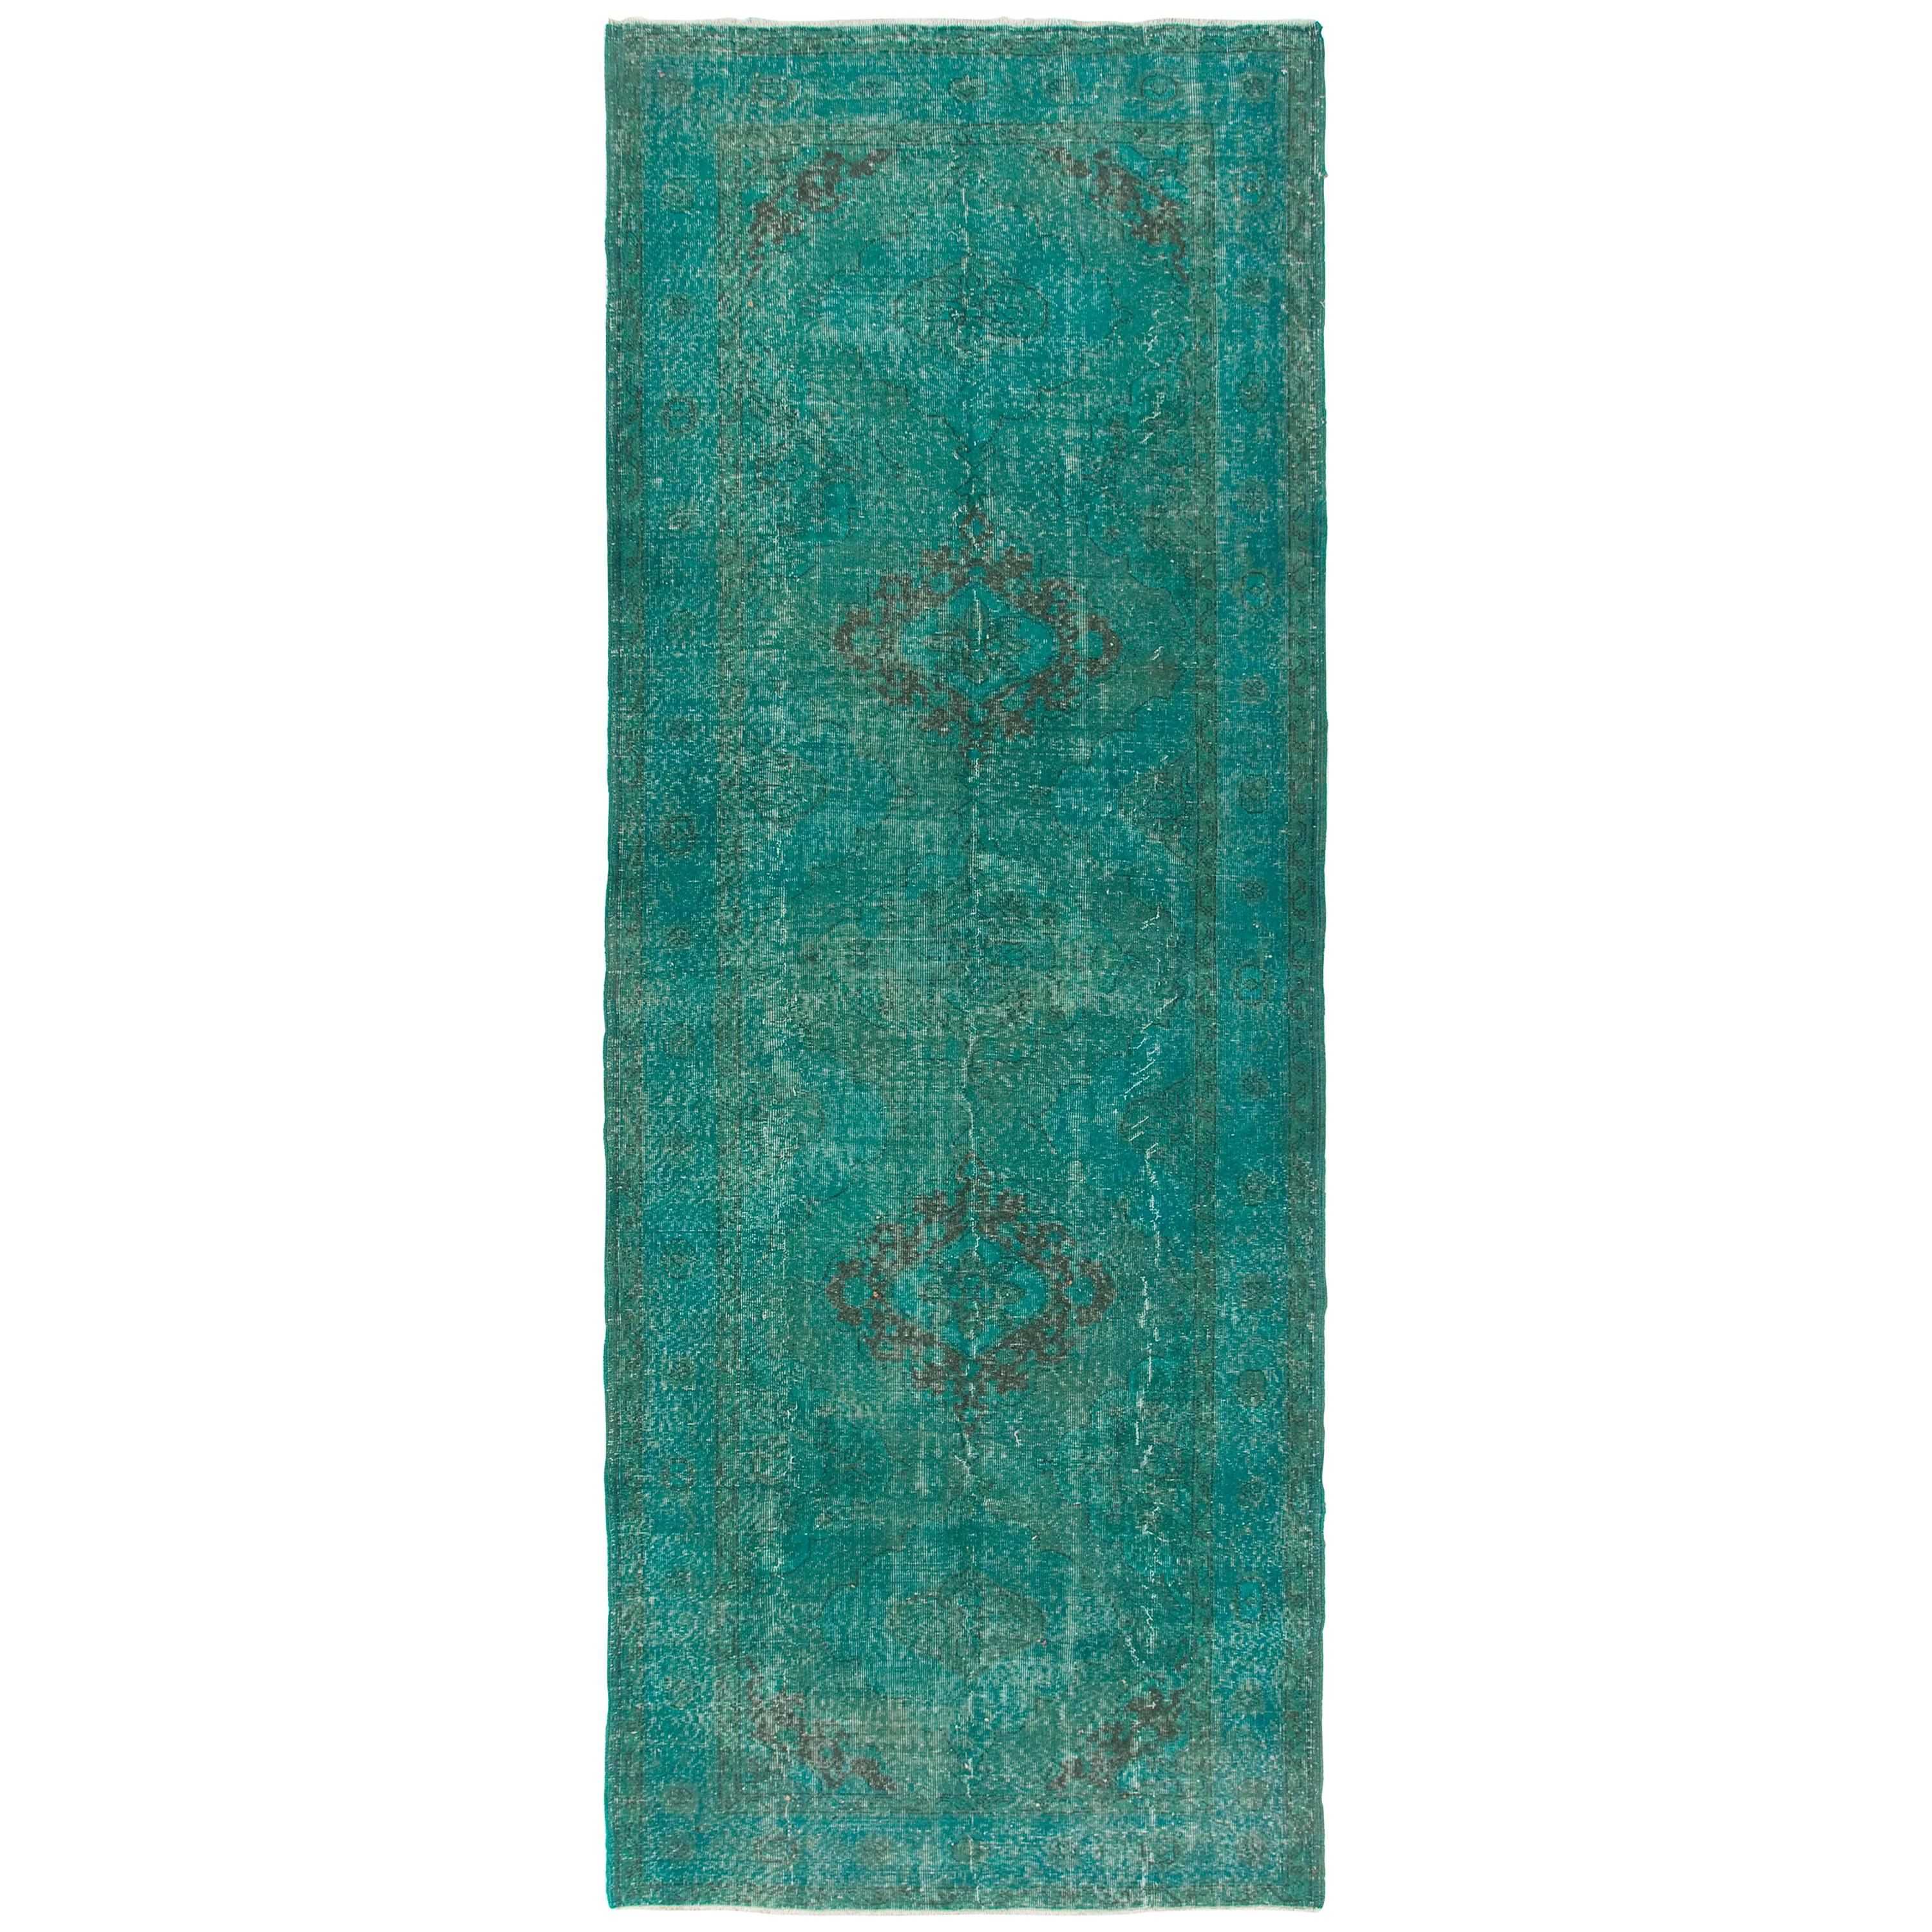 5x13 Ft (can be altered) Vintage Runner Rug Overdyed in Teal 4 Modern Interiors For Sale